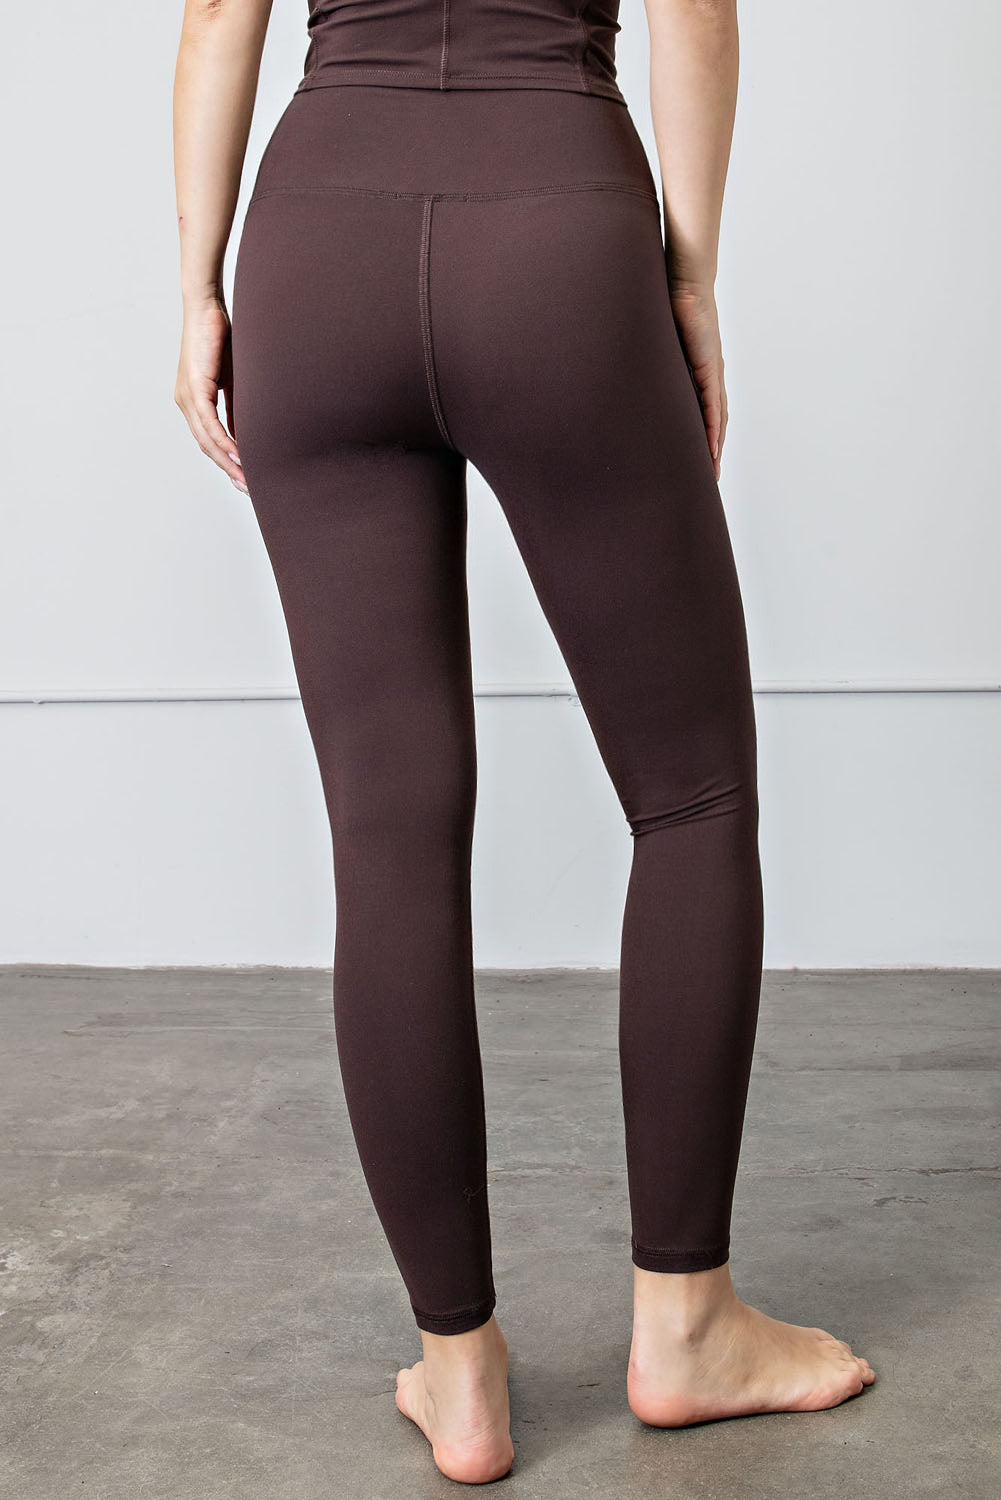 butter soft leggings, butter soft leggings Suppliers and